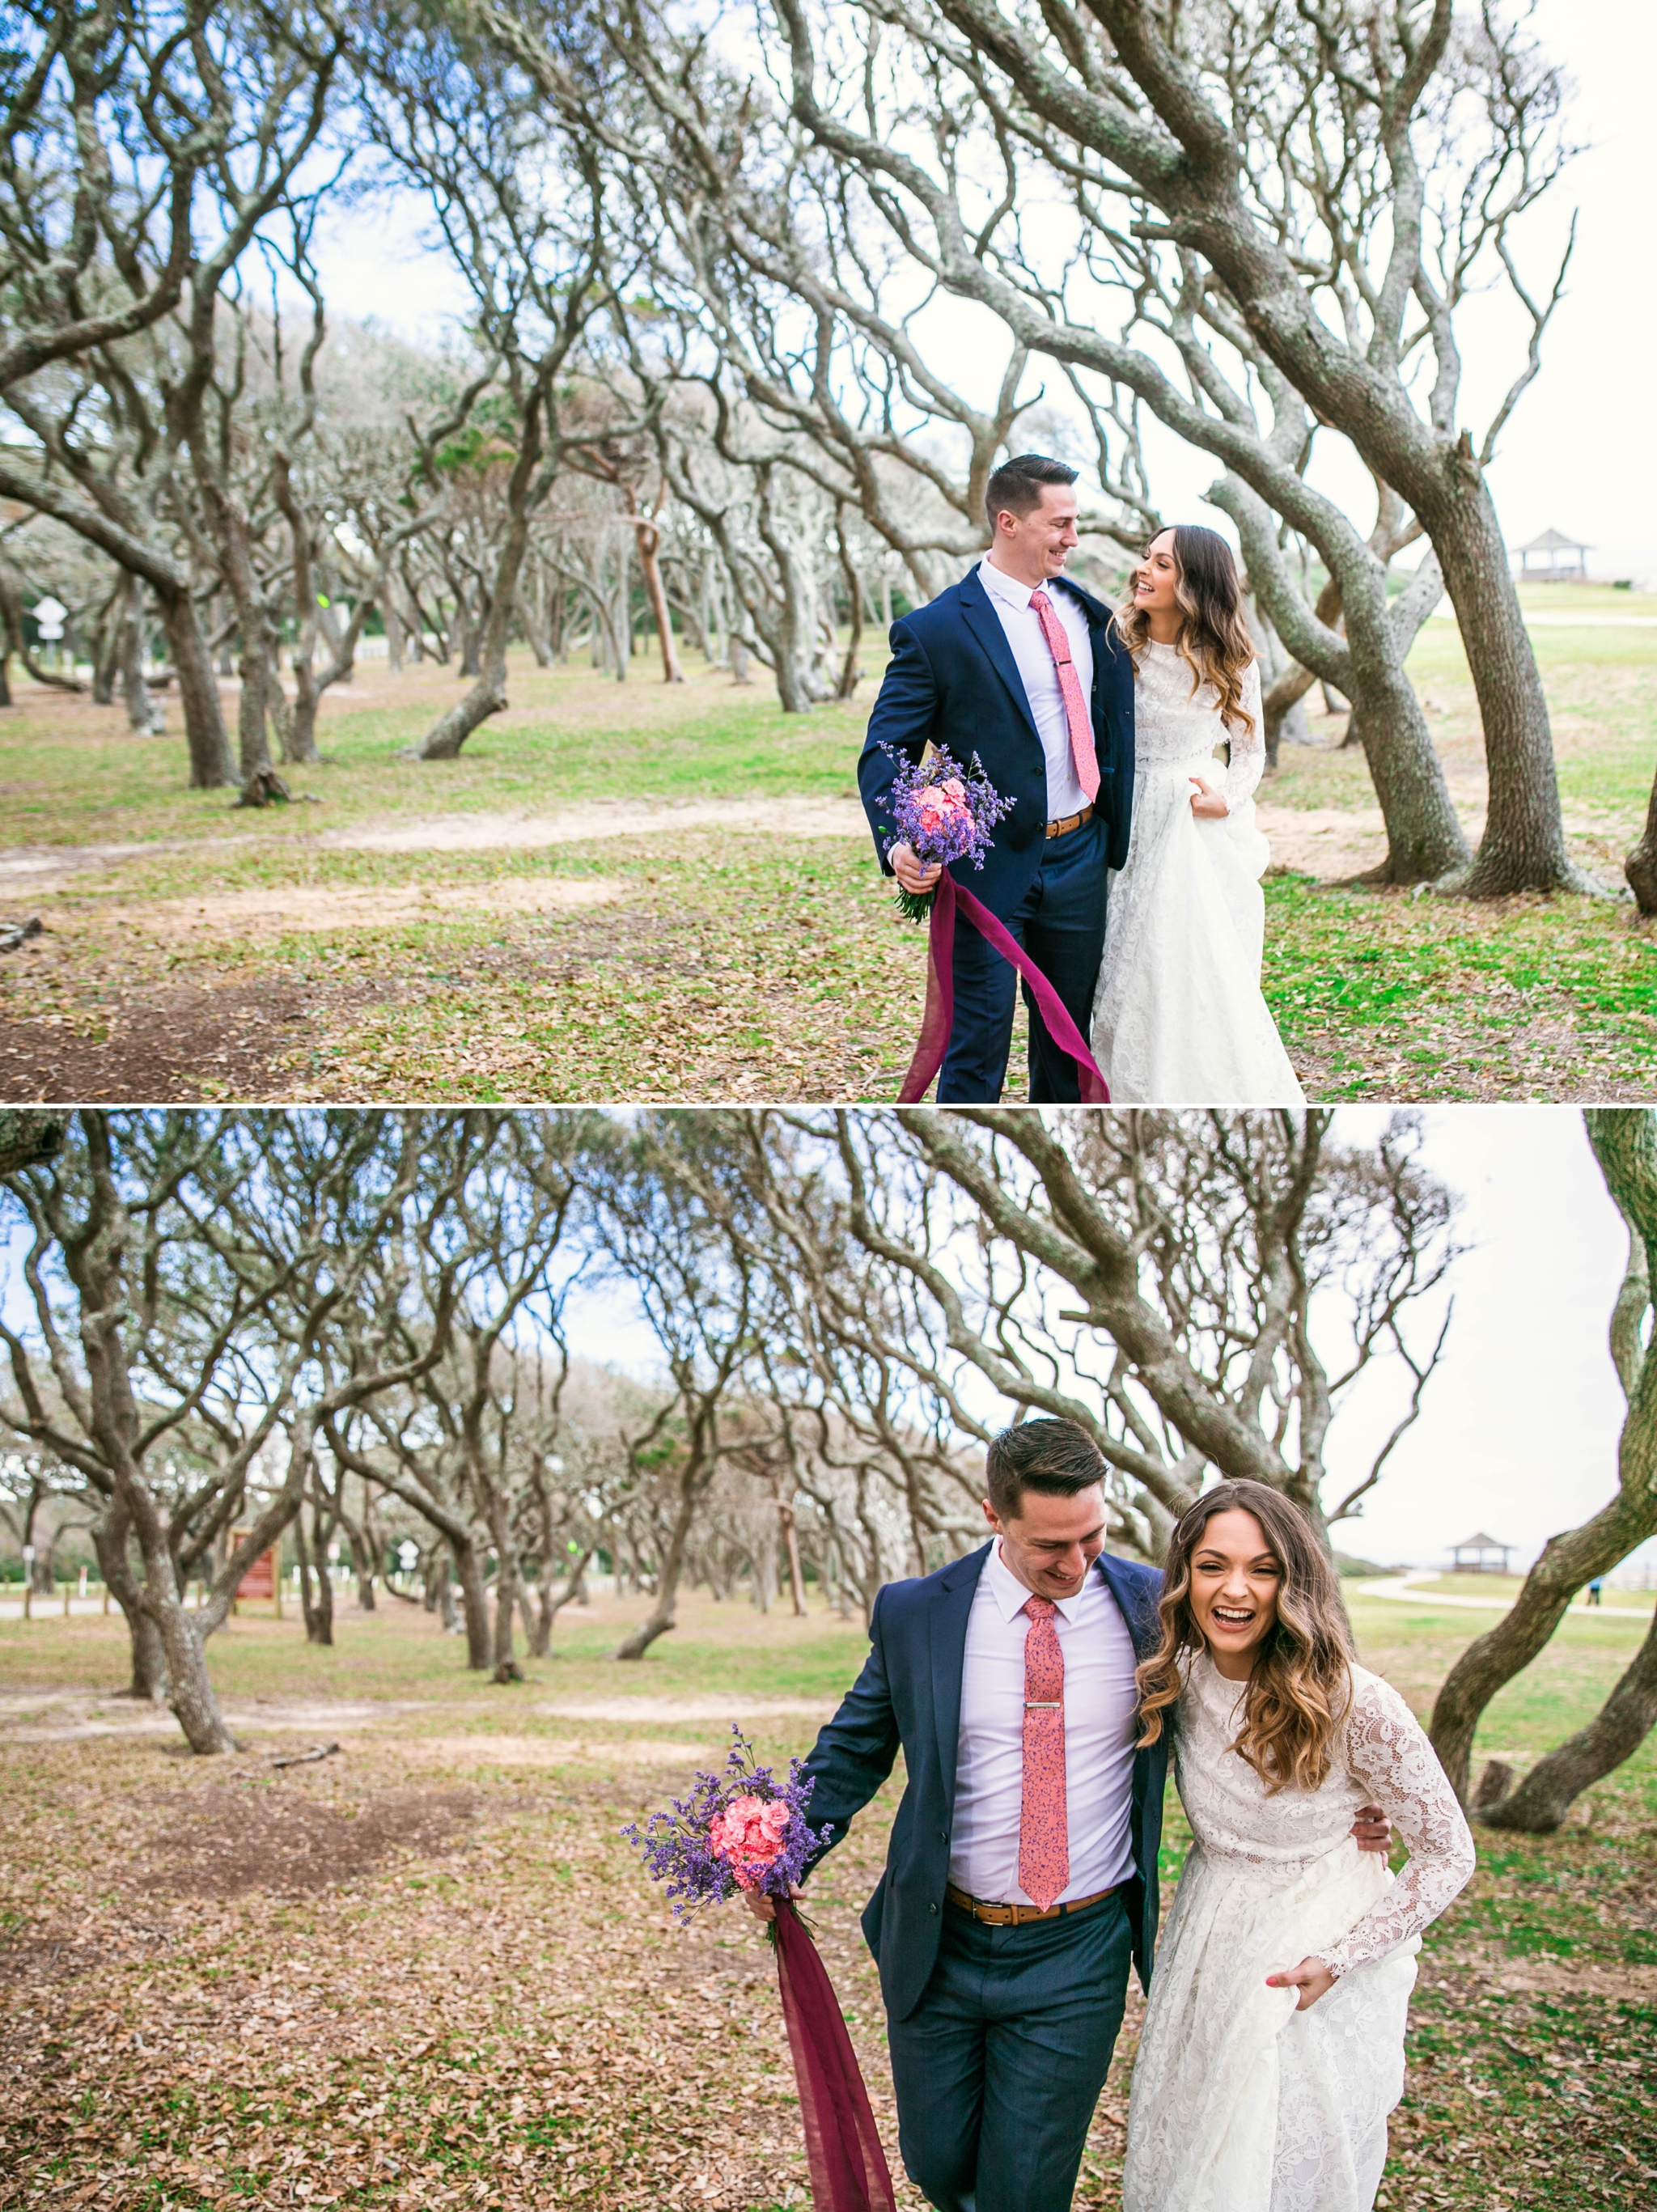 Beach Elopement Photography within the oak trees - dress by asos with purple and pink flowers and navy suit - oahu hawaii wedding photographer 